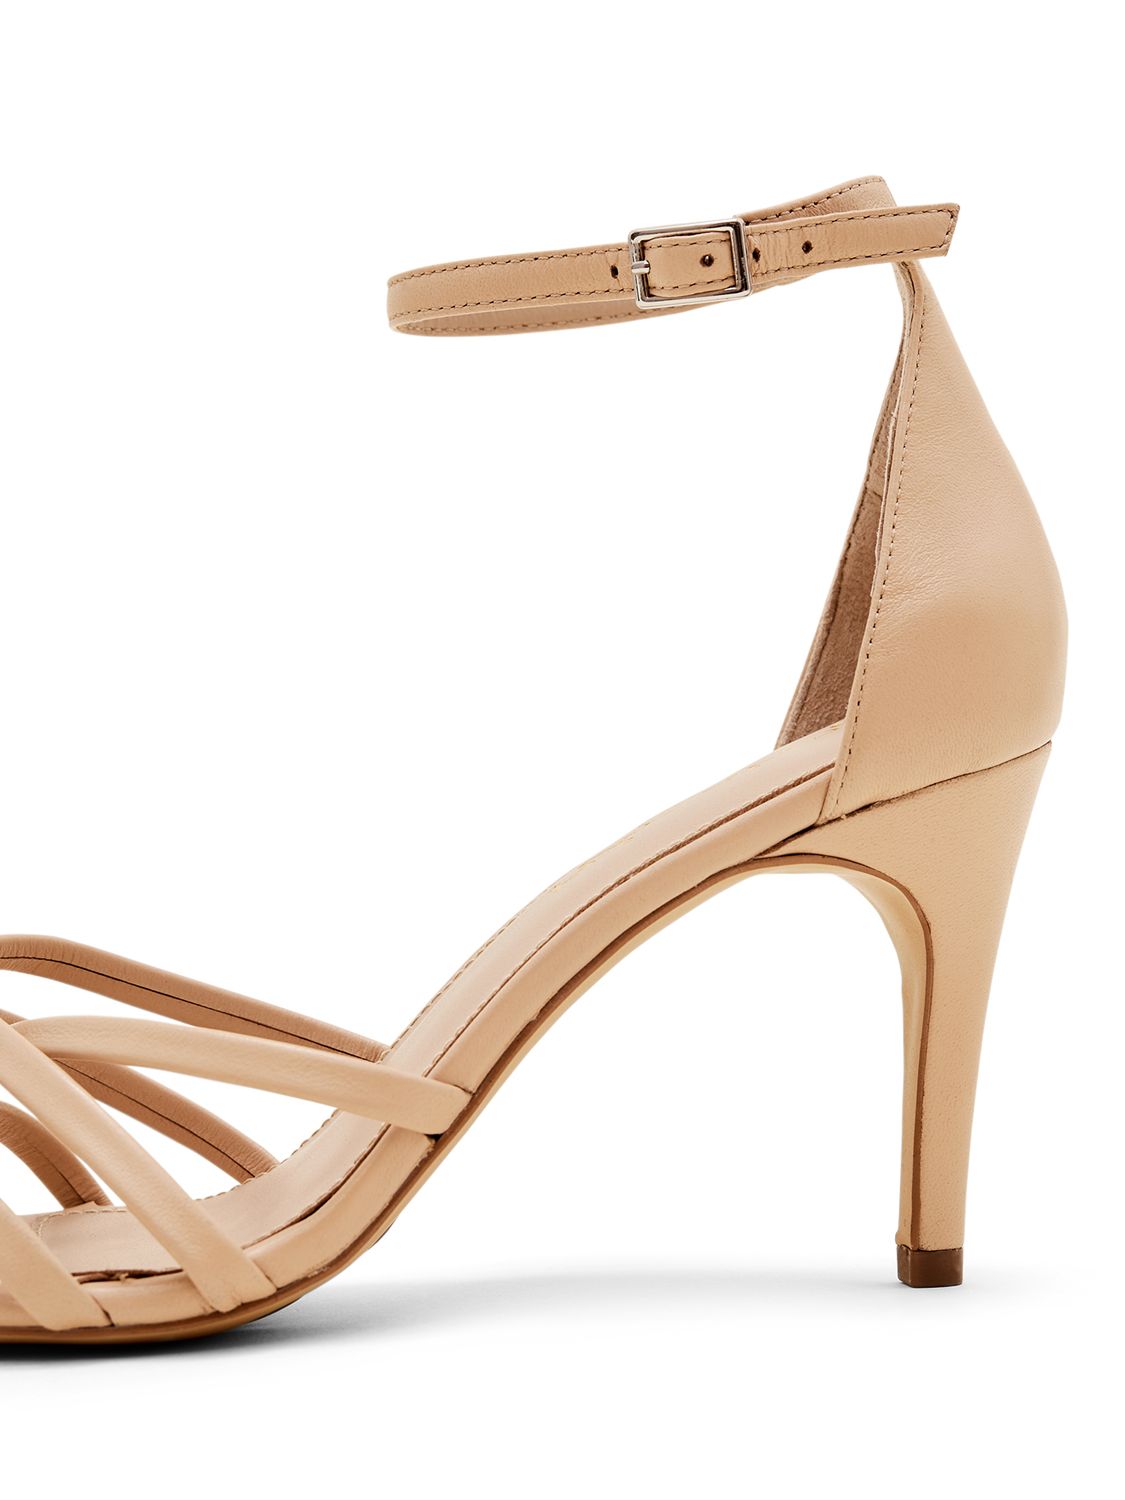 Buy Phase Eight Barely There Strappy Sandals, Natural Online at johnlewis.com